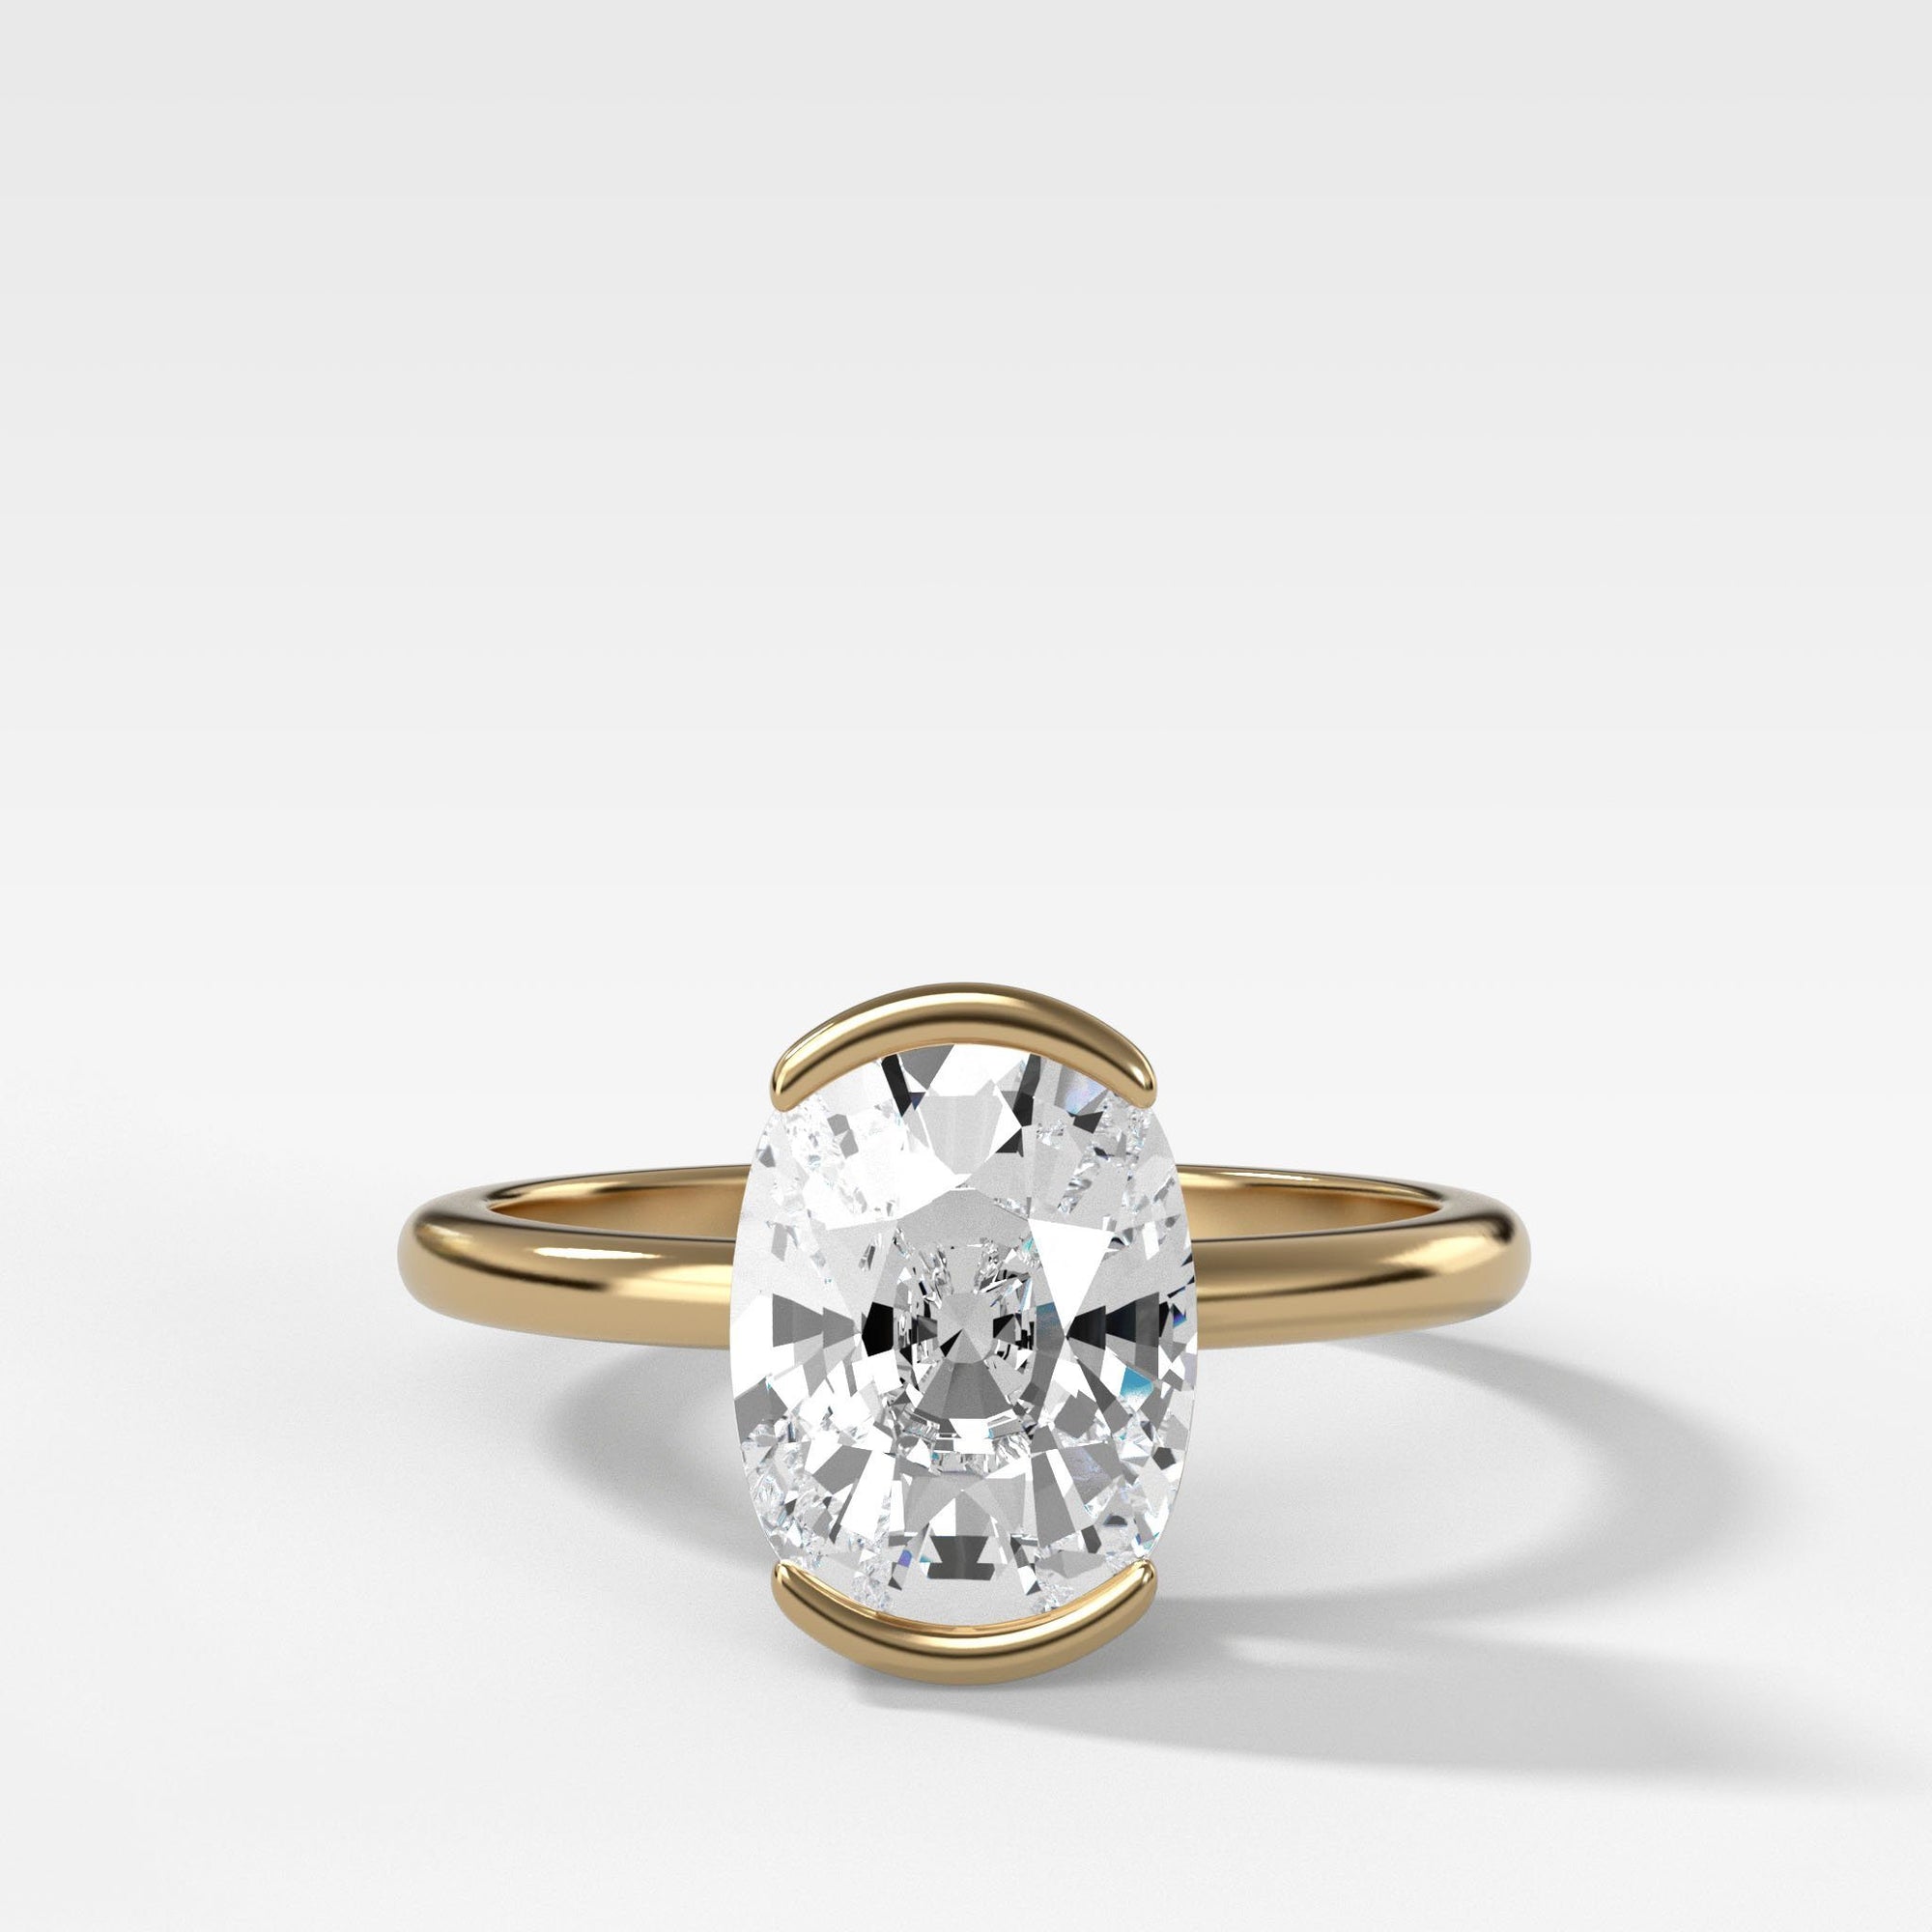 North South Half Bezel Solitaire Engagement Ring With Elongated Cushion Cut by Good Stone in Yellow Gold